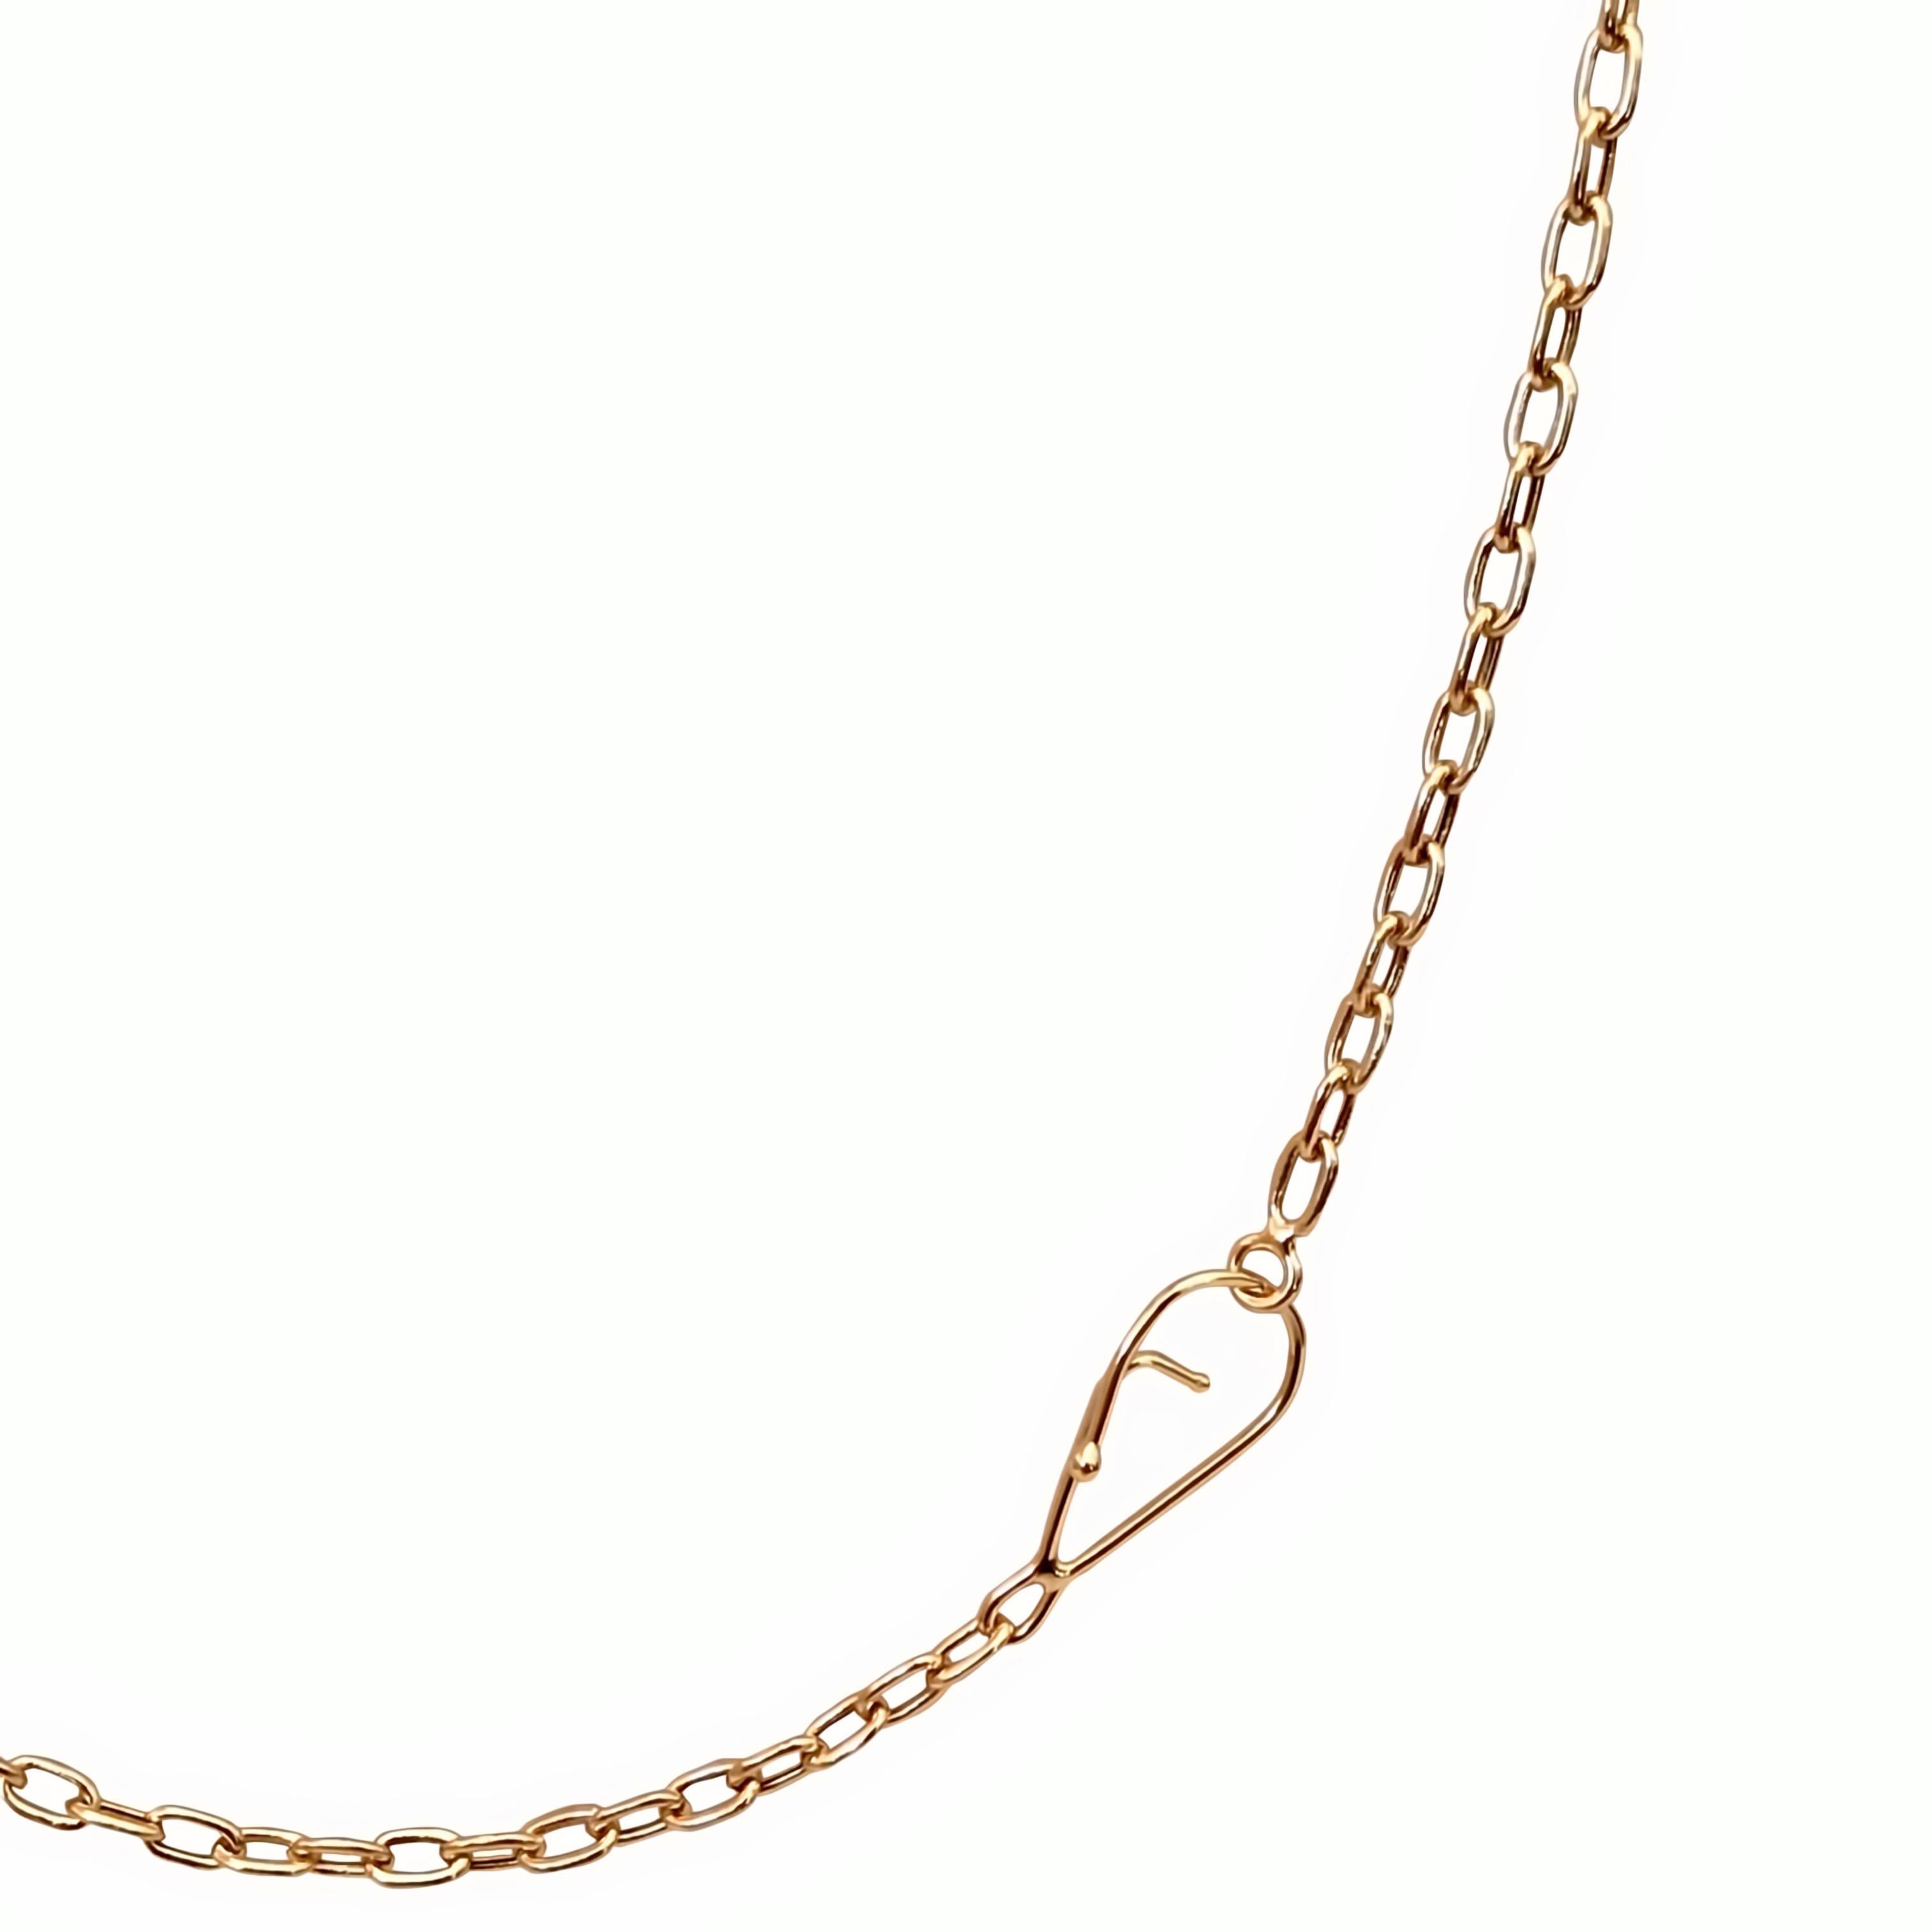 18 Karat vintage-inspired solid yellow gold chain with a handmade secure clasp.
Ideal to wear with pendants, layered with other chains or just by itself.
Gauge:  3.00 mm
Length : 46.00 cm 
Hallmark: London’s Goldsmiths’ Company –  Assay Office (